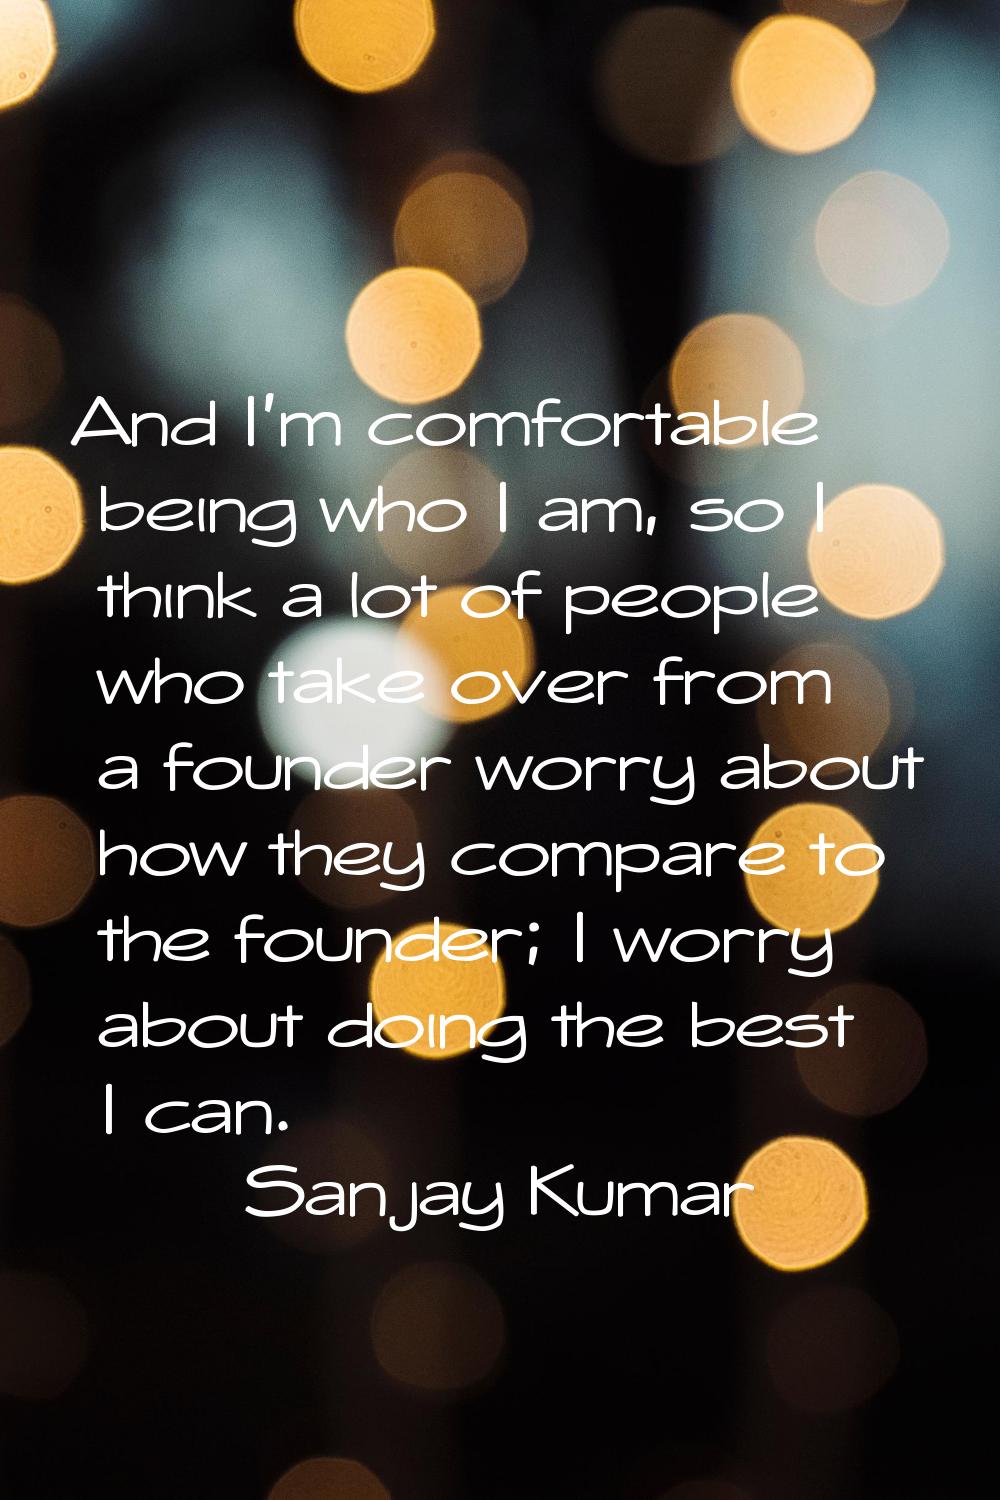 And I'm comfortable being who I am, so I think a lot of people who take over from a founder worry a